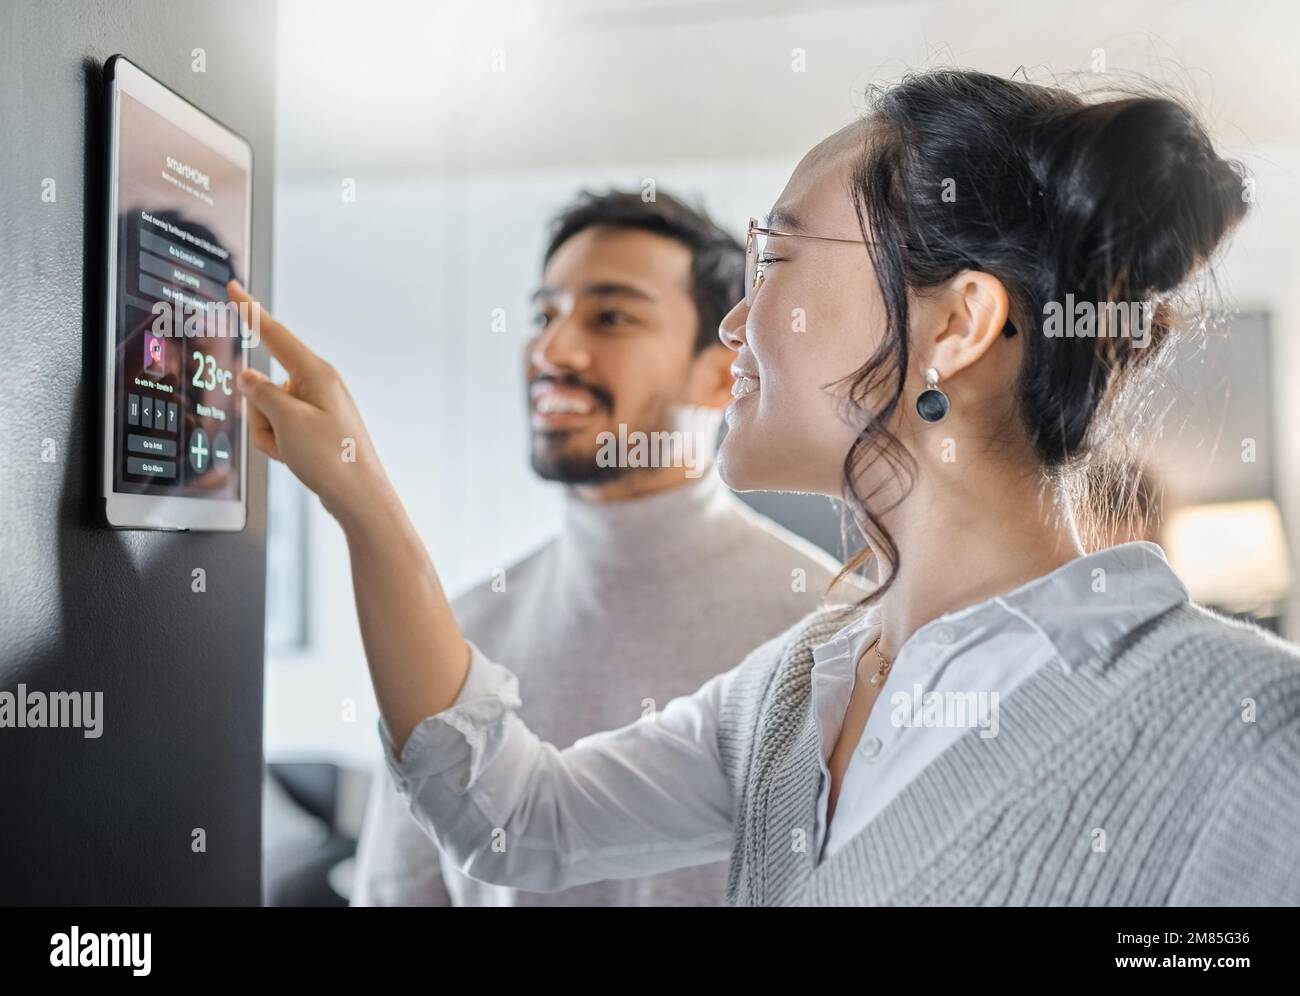 Smart home technology, wall system and couple with digital dashboard for air conditioning, safety security network or house automation. App software Stock Photo